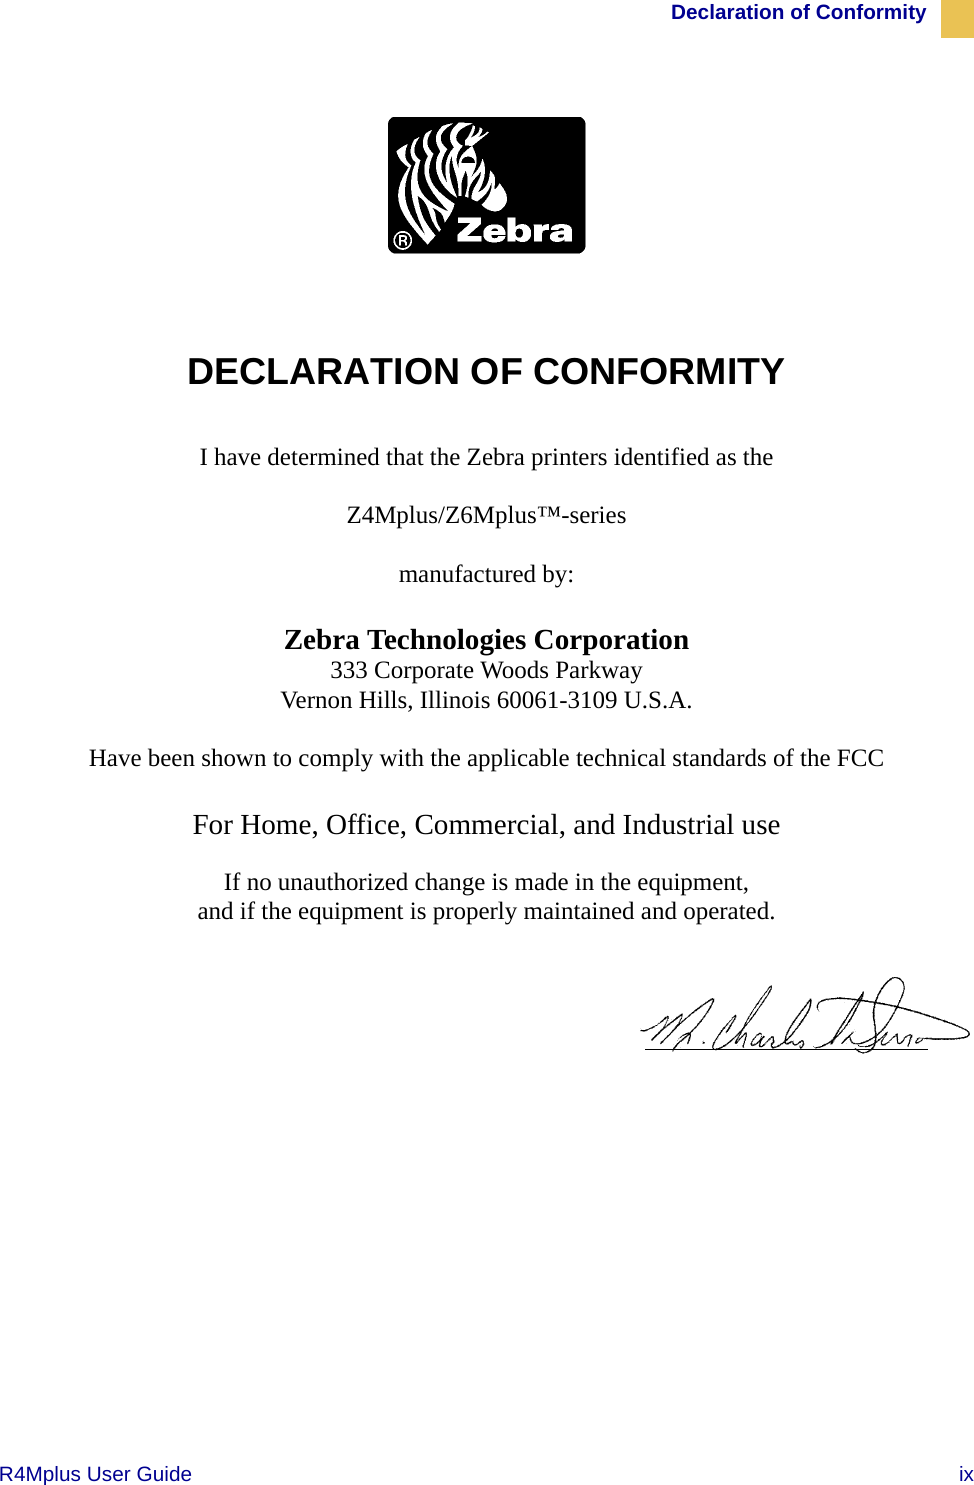 Declaration of ConformityR4Mplus User Guide  ixDECLARATION OF CONFORMITYI have determined that the Zebra printers identified as theZ4Mplus/Z6Mplus™-seriesmanufactured by:Zebra Technologies Corporation333 Corporate Woods ParkwayVernon Hills, Illinois 60061-3109 U.S.A.Have been shown to comply with the applicable technical standards of the FCCFor Home, Office, Commercial, and Industrial useIf no unauthorized change is made in the equipment,and if the equipment is properly maintained and operated.